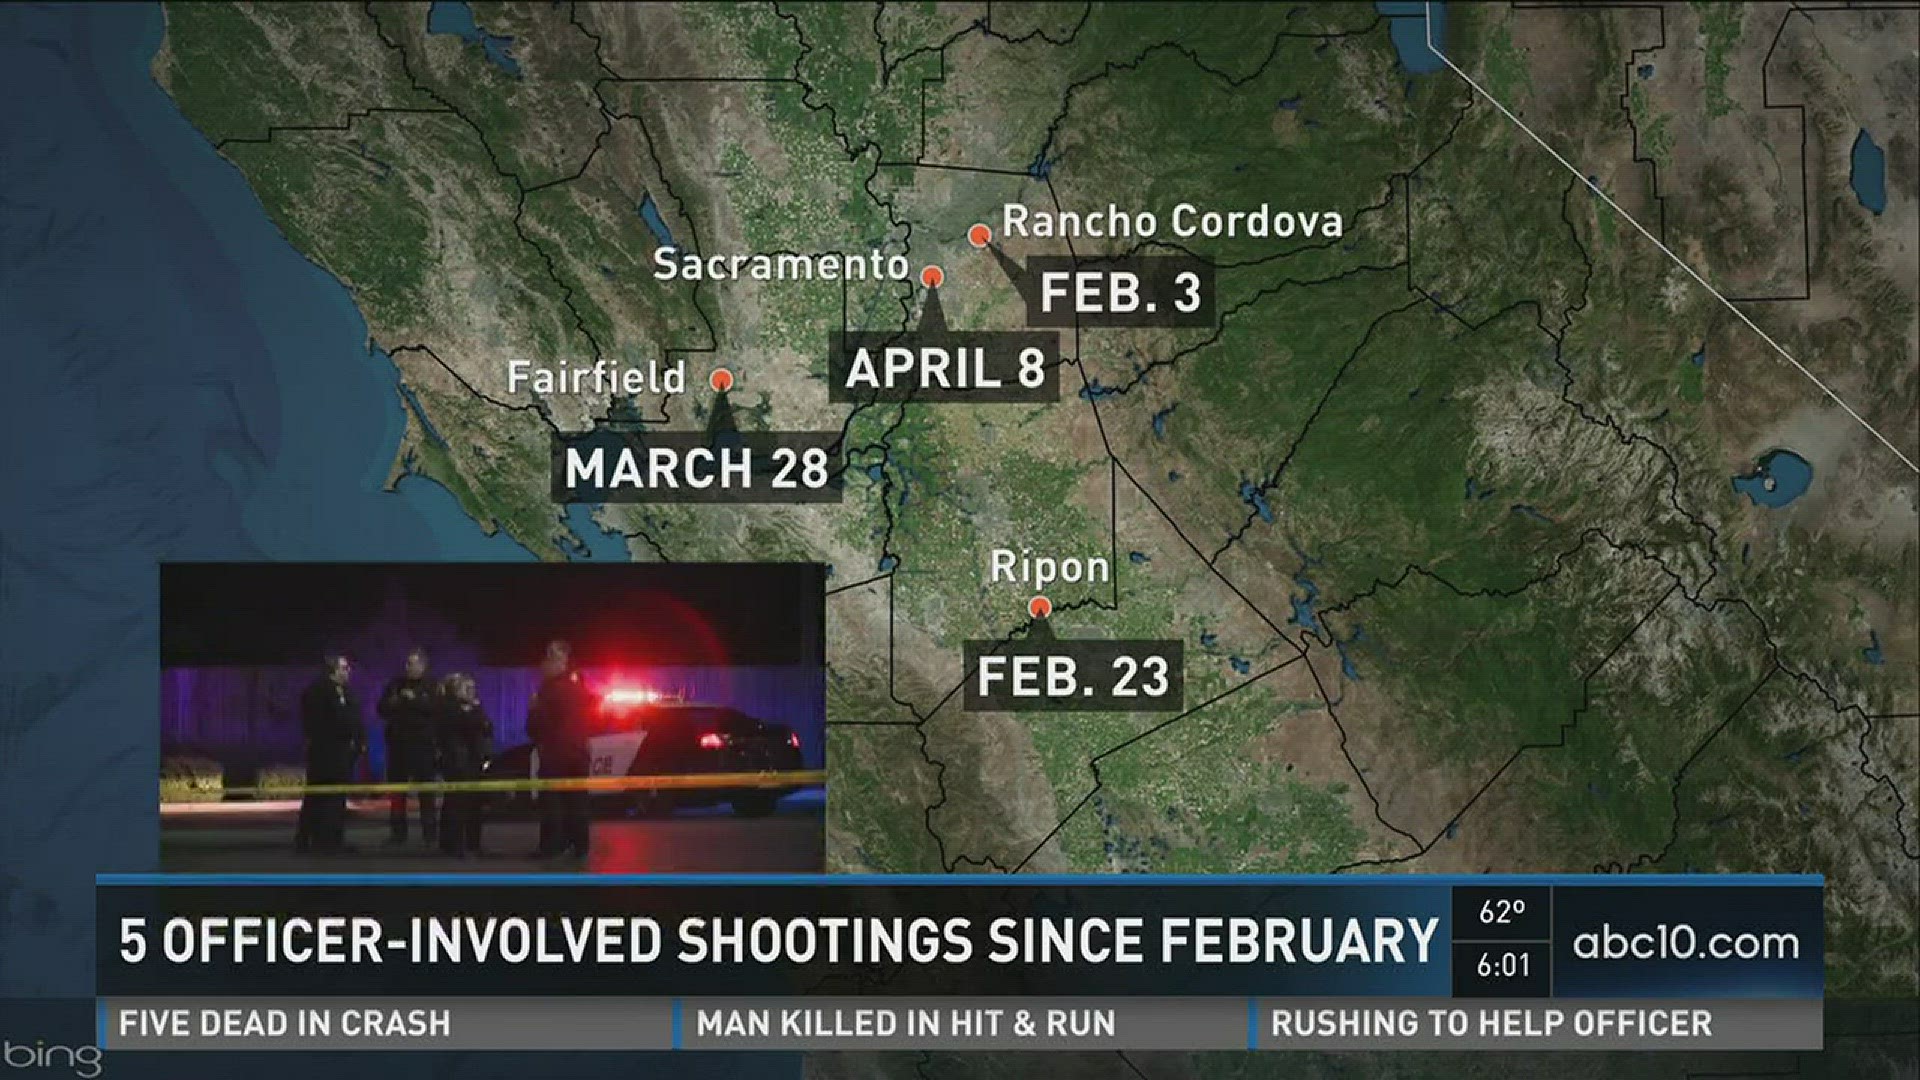 A fatal officer-involved shooting in Modesto on Sunday, April 10, 2016 was the fifth in our area in recent months.